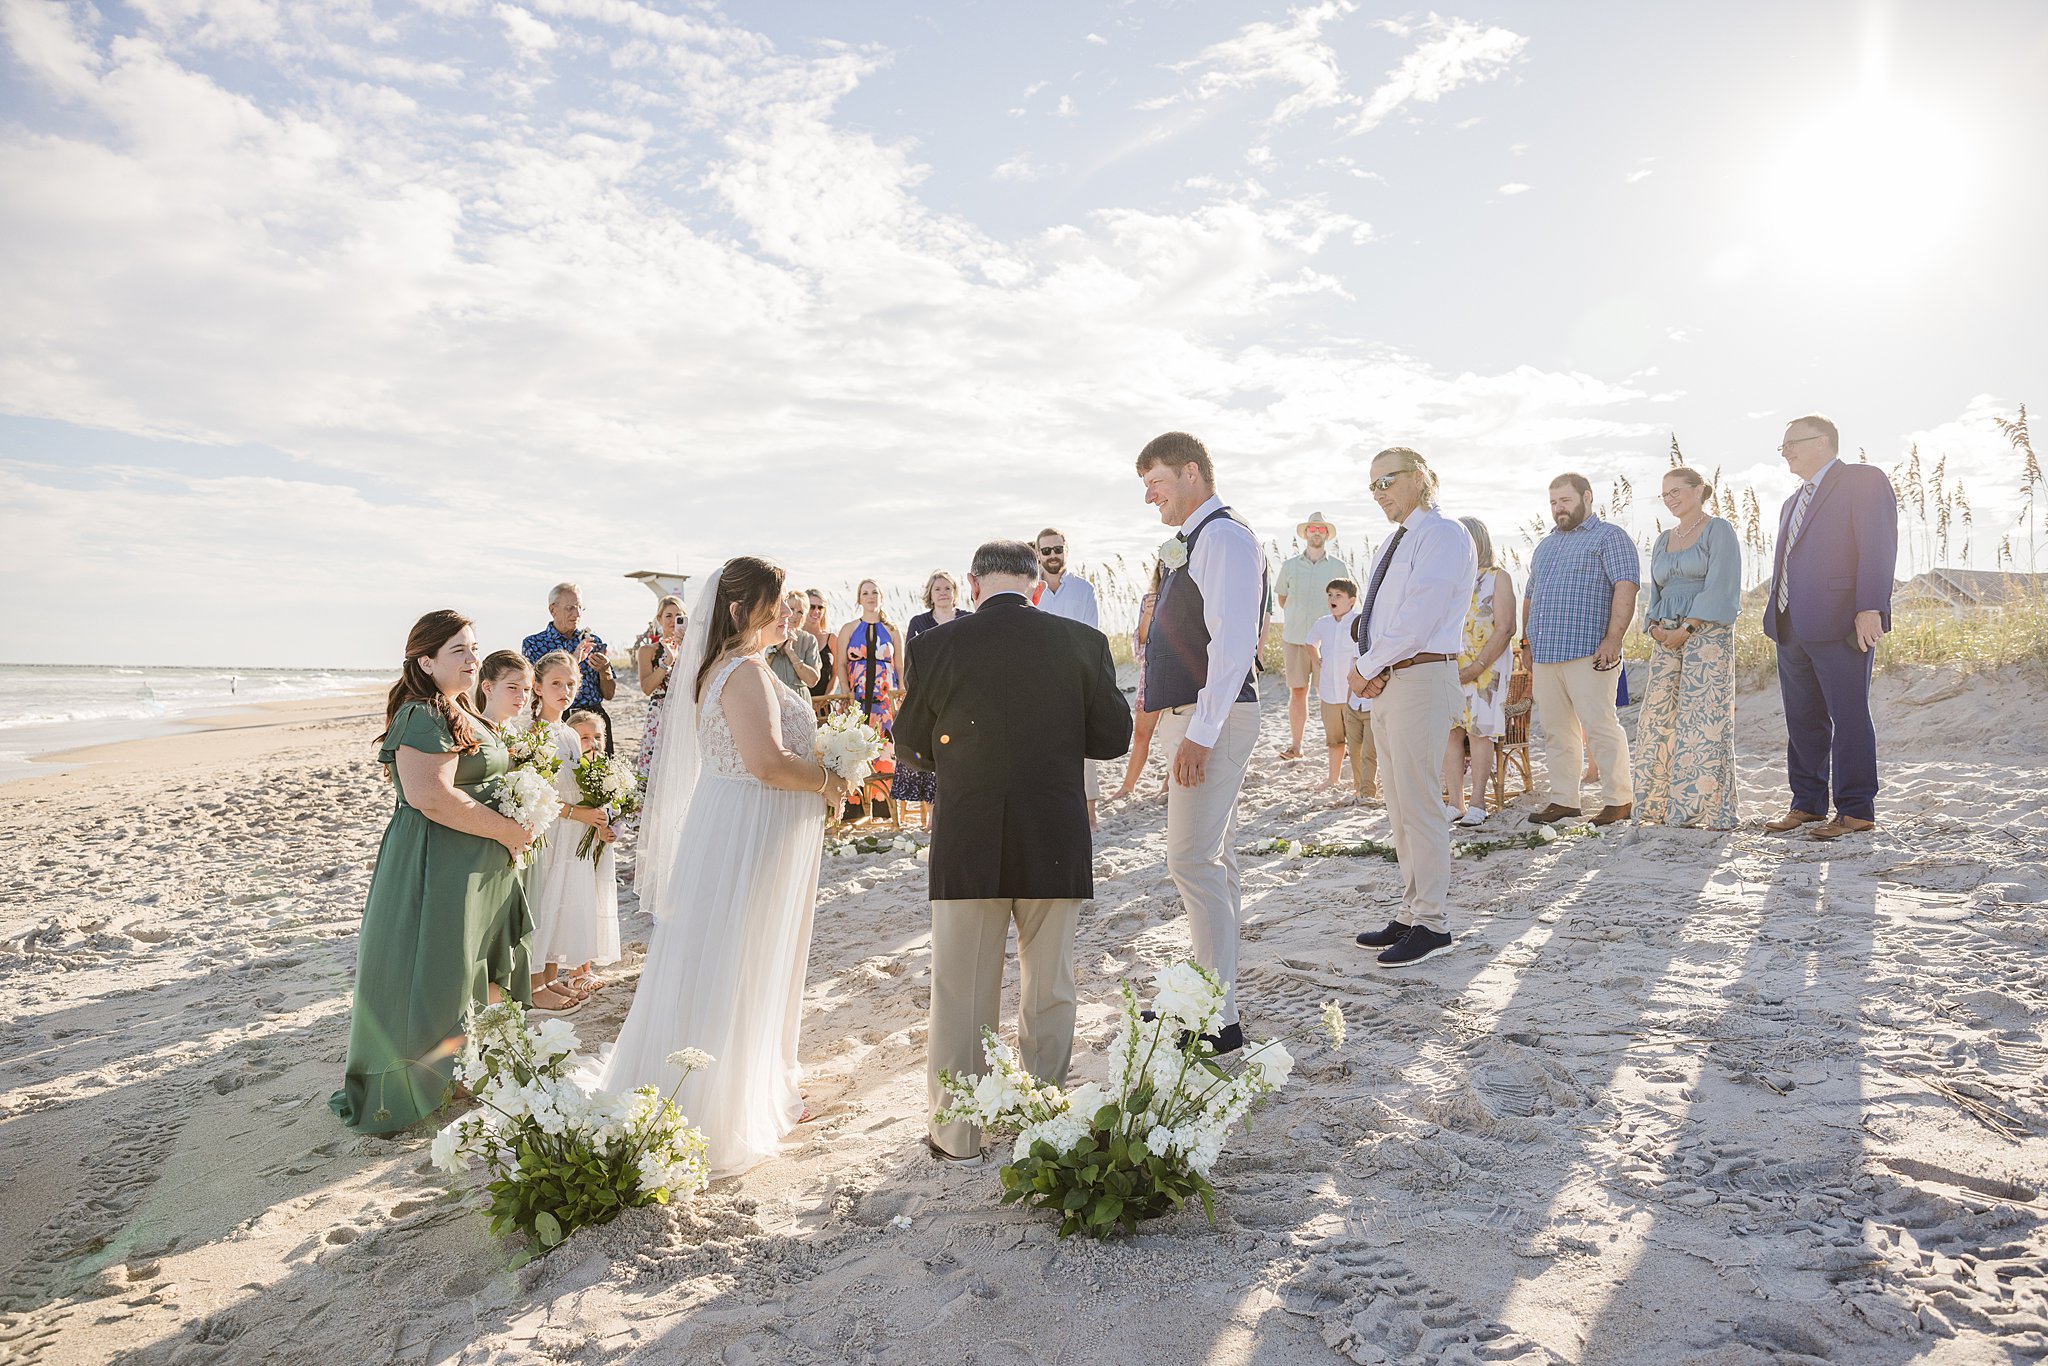 Newlyweds stand with family and friends during their wrightsville beach wedding and elopement ceremony